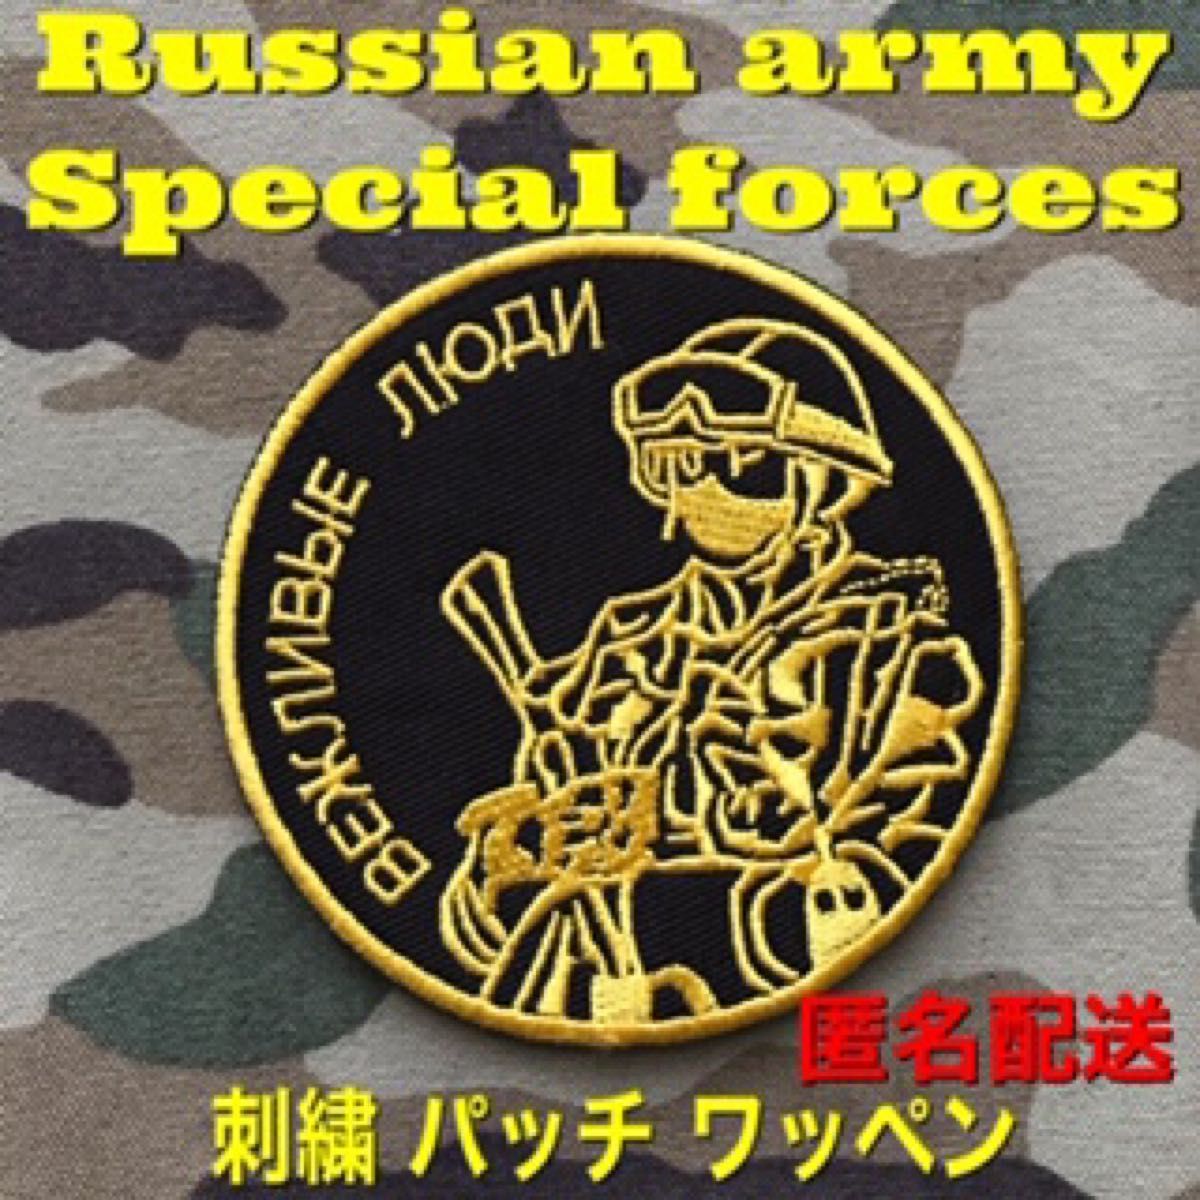 Russian army Special forces ミリタリー 刺繍 パッチ ワッペン ロシア軍 特殊部隊 サバゲー リメイク